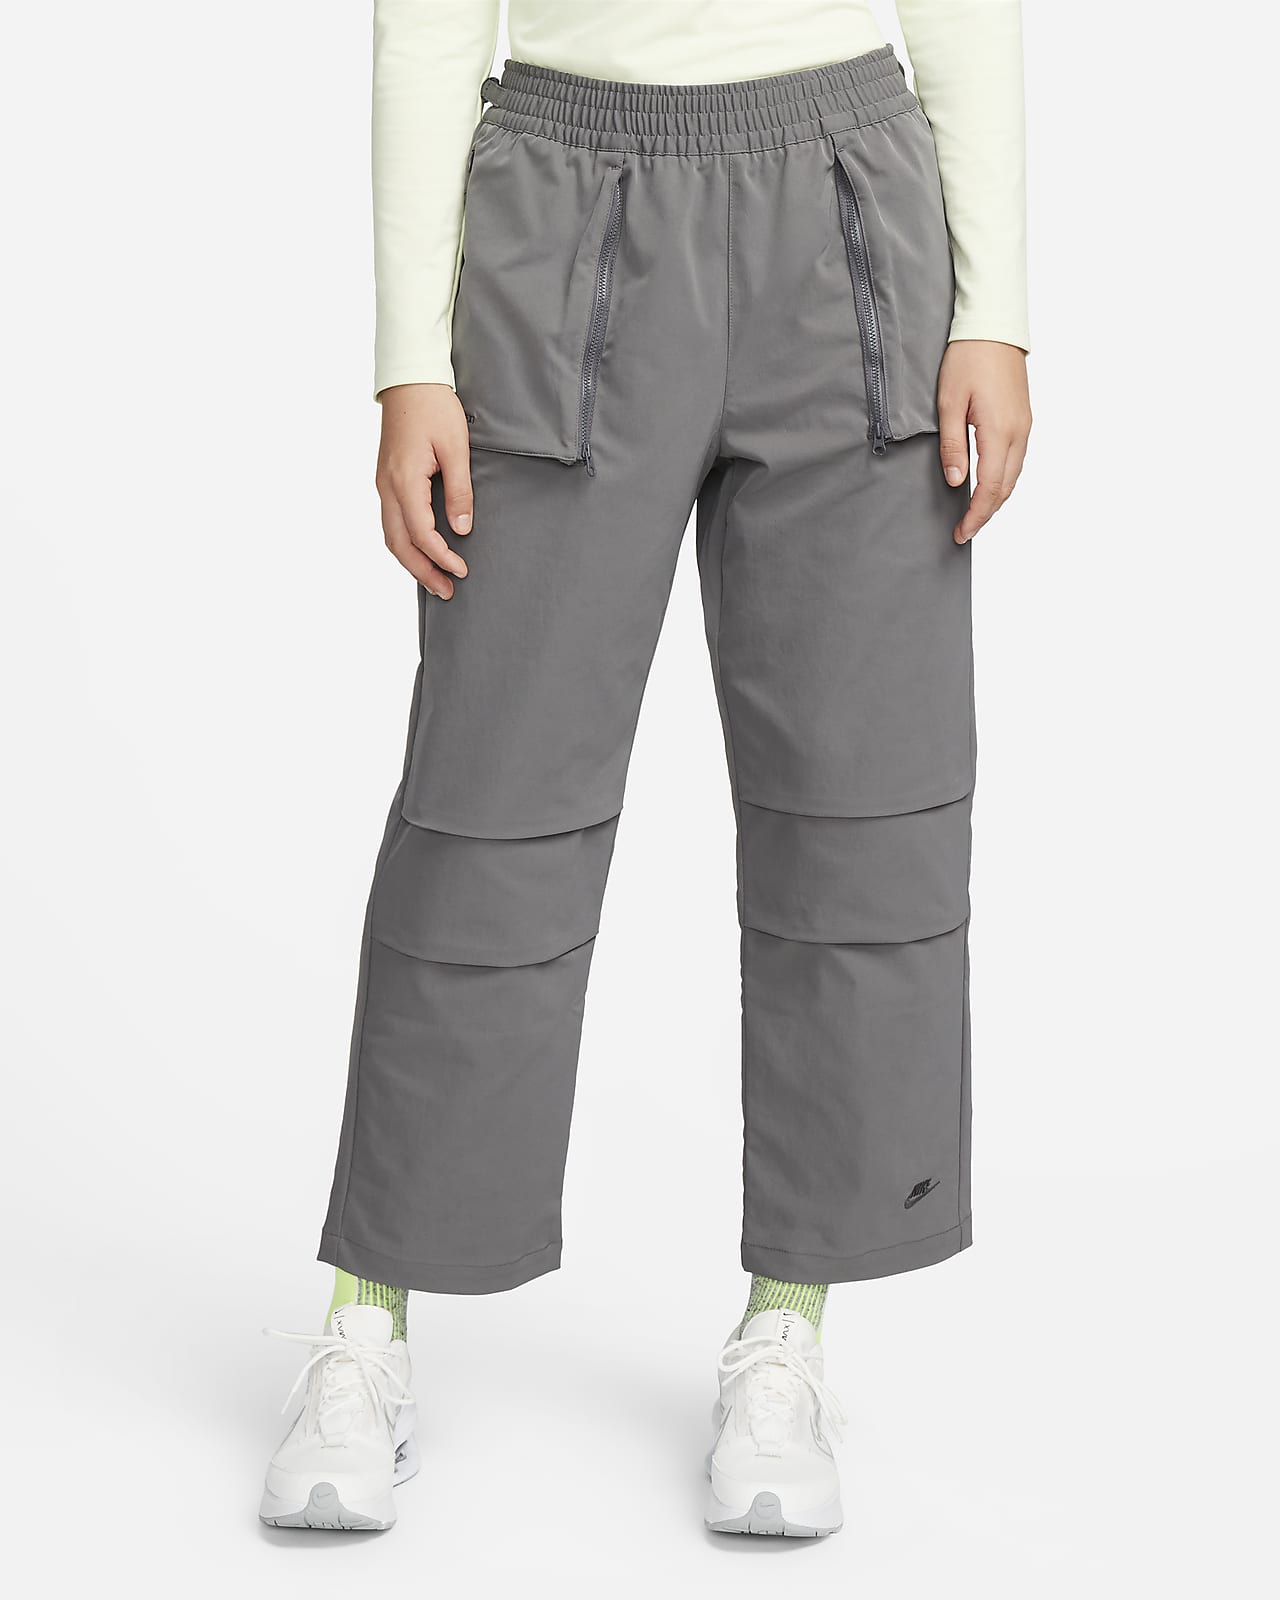 Genuine Nike long pants quick-drying casual women's pants outlets Taobo  Sports official flagship store discount